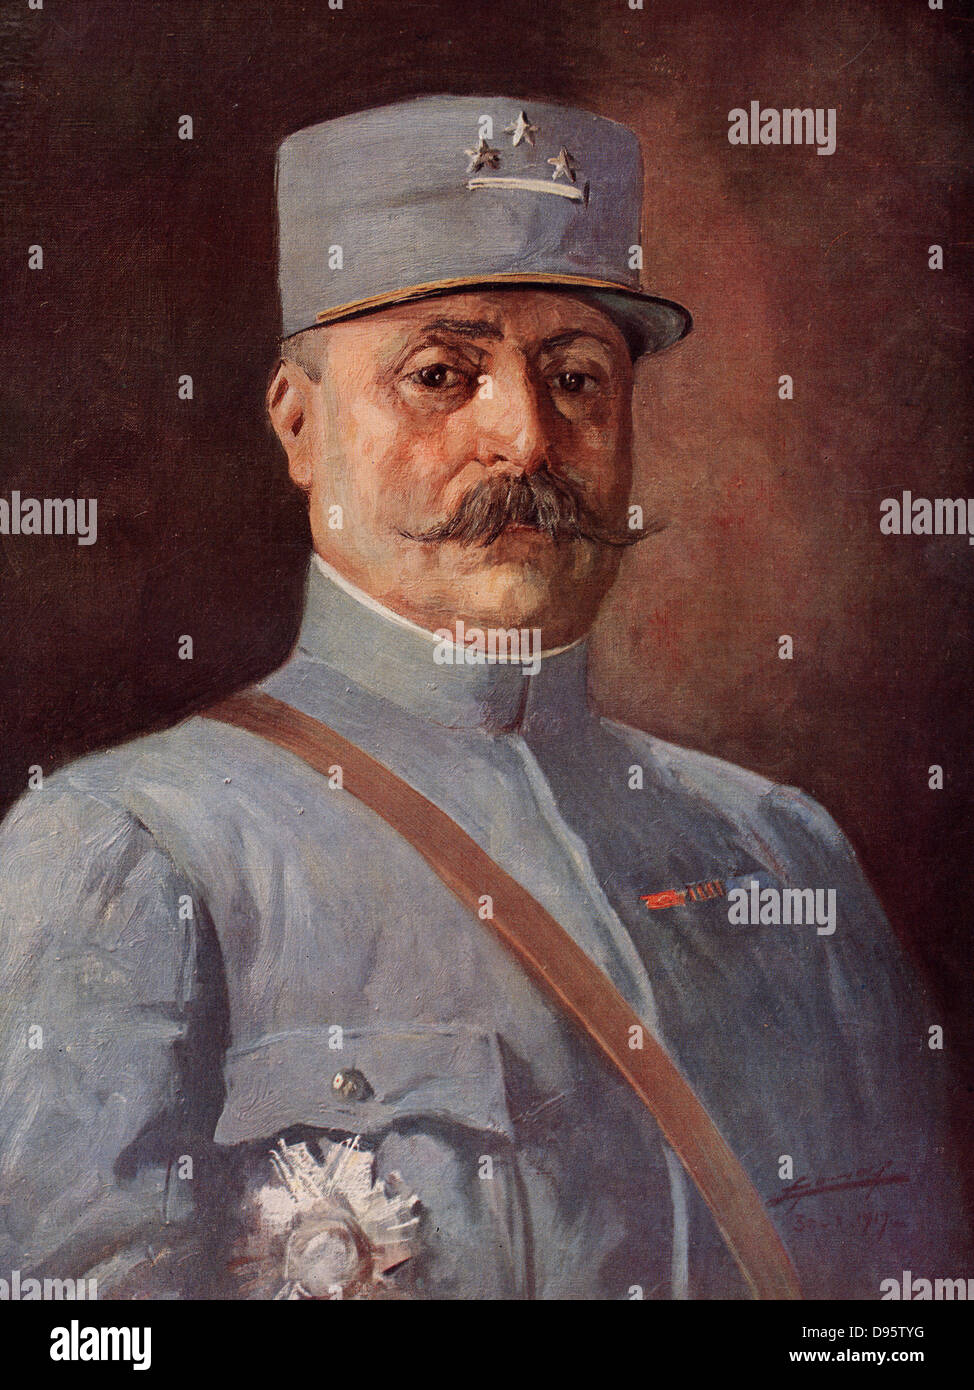 General Adolph Guillaumat (1863-1940). French military commander in the First World War.  At the end of the war he was appointed to the Supreme War Council at Versailles. Stock Photo